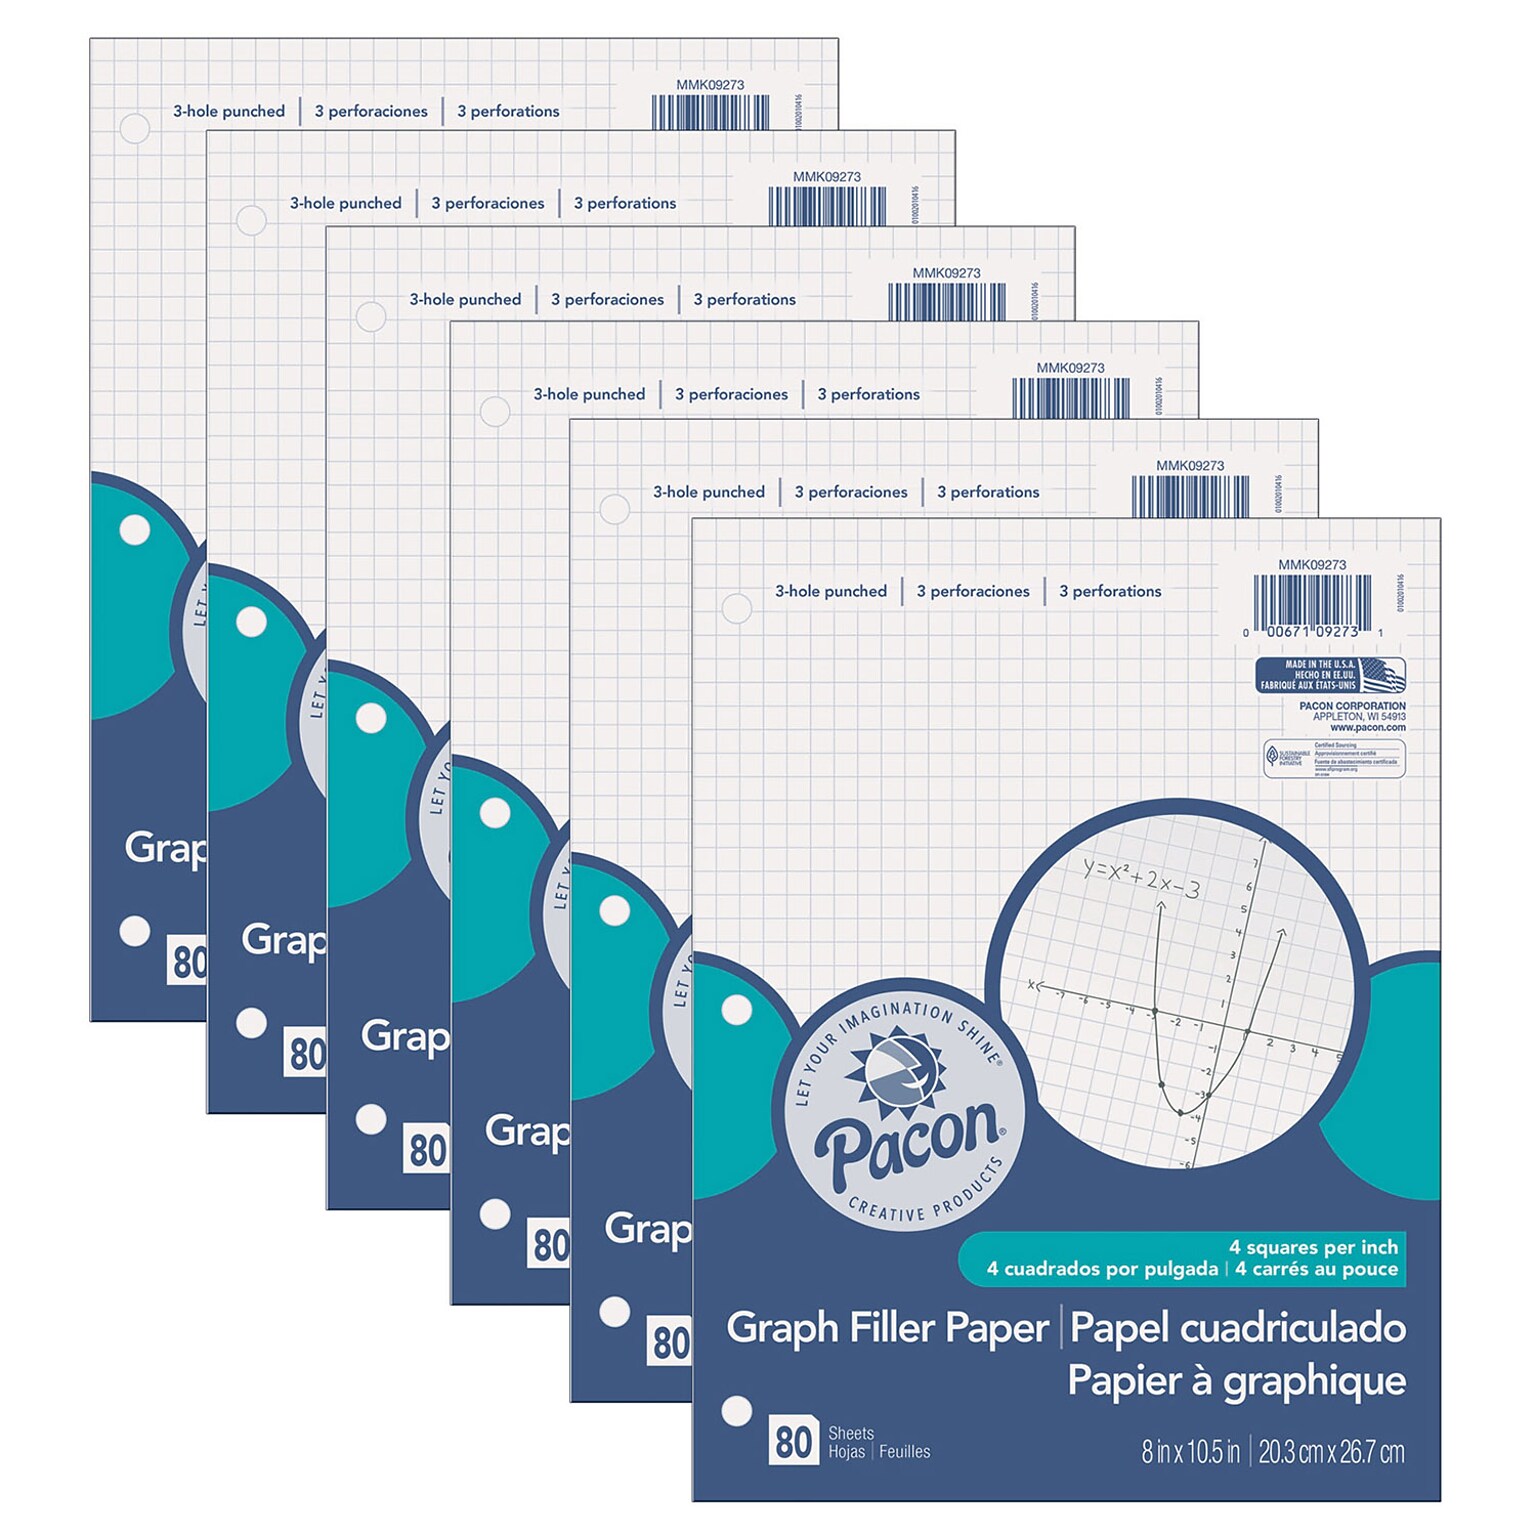 Pacon Graph Paper, 8 x 10.5, 3-Hole Punched, 80 Sheets/Pack, 6/Bundle (PACMMK09273-6)